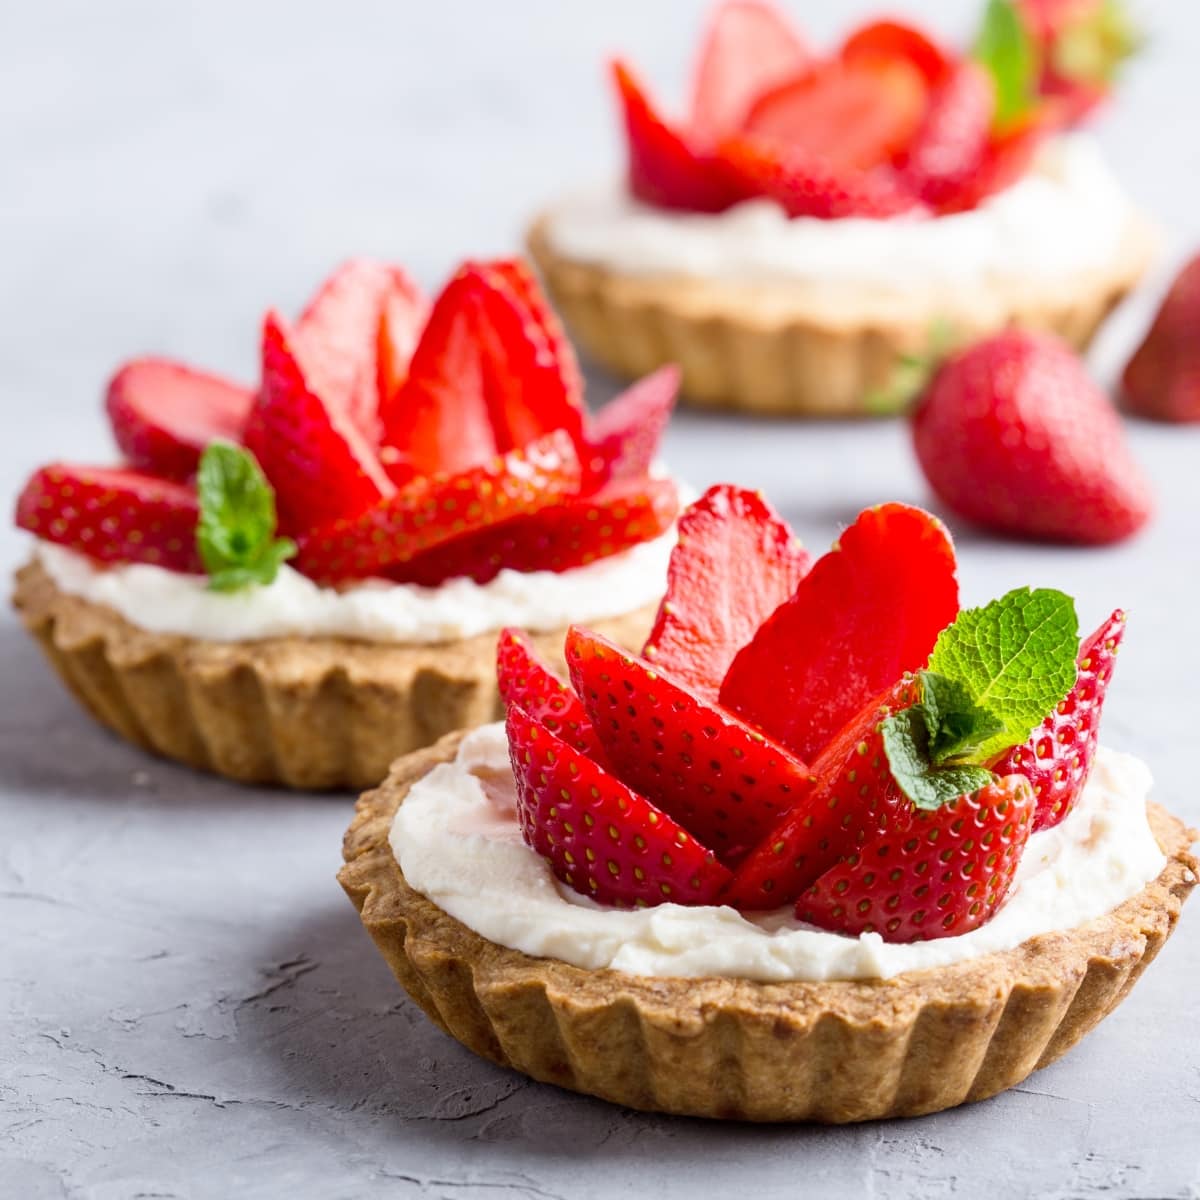 Mini Strawberry Tarts with Cream and A Sprig of Mint